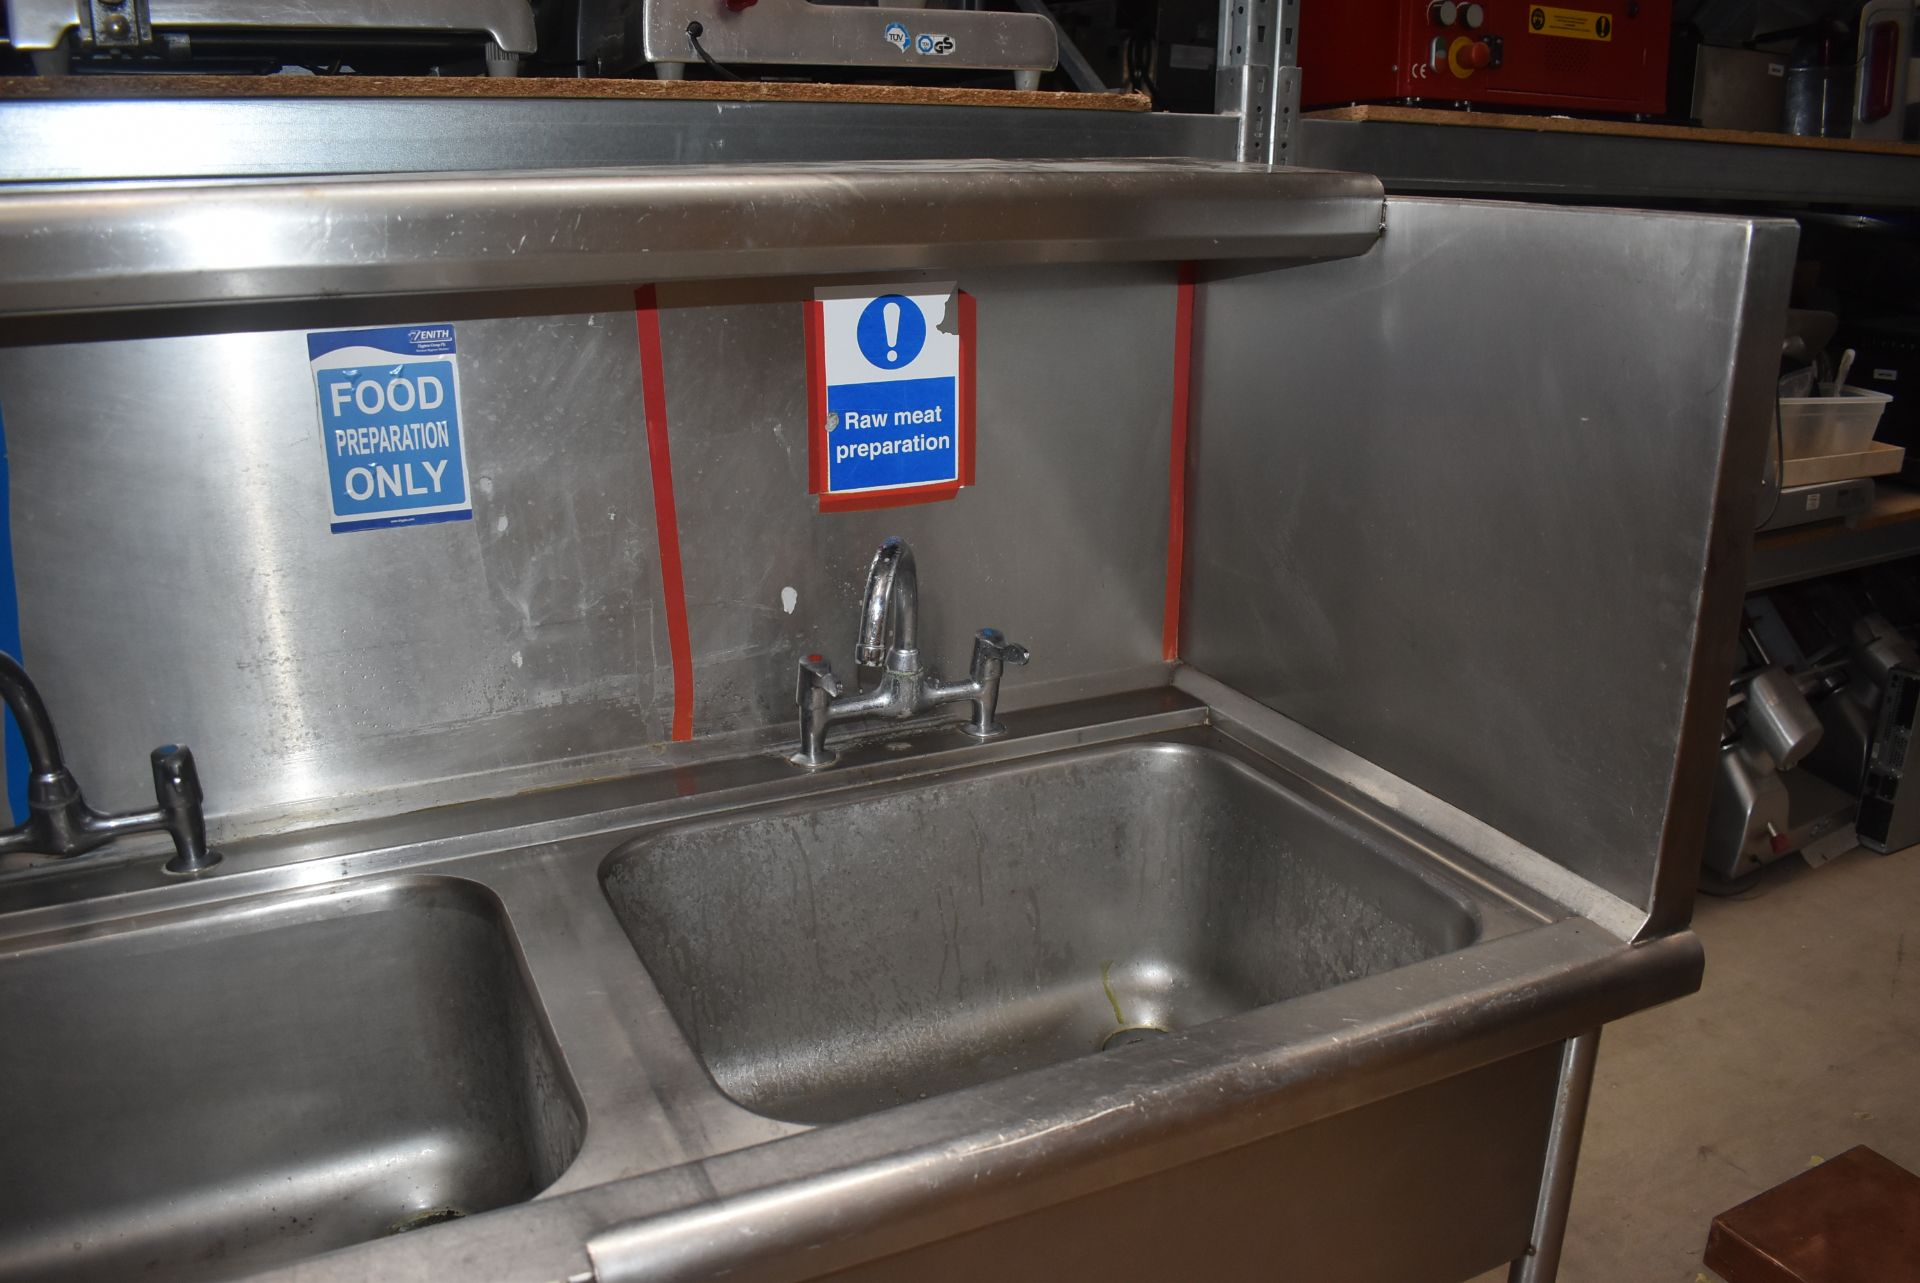 1 x Stainless Steel Twin Sink Wash Unit With Mixer Taps and Splash Back Surround - Width: 125 cms - Image 11 of 11